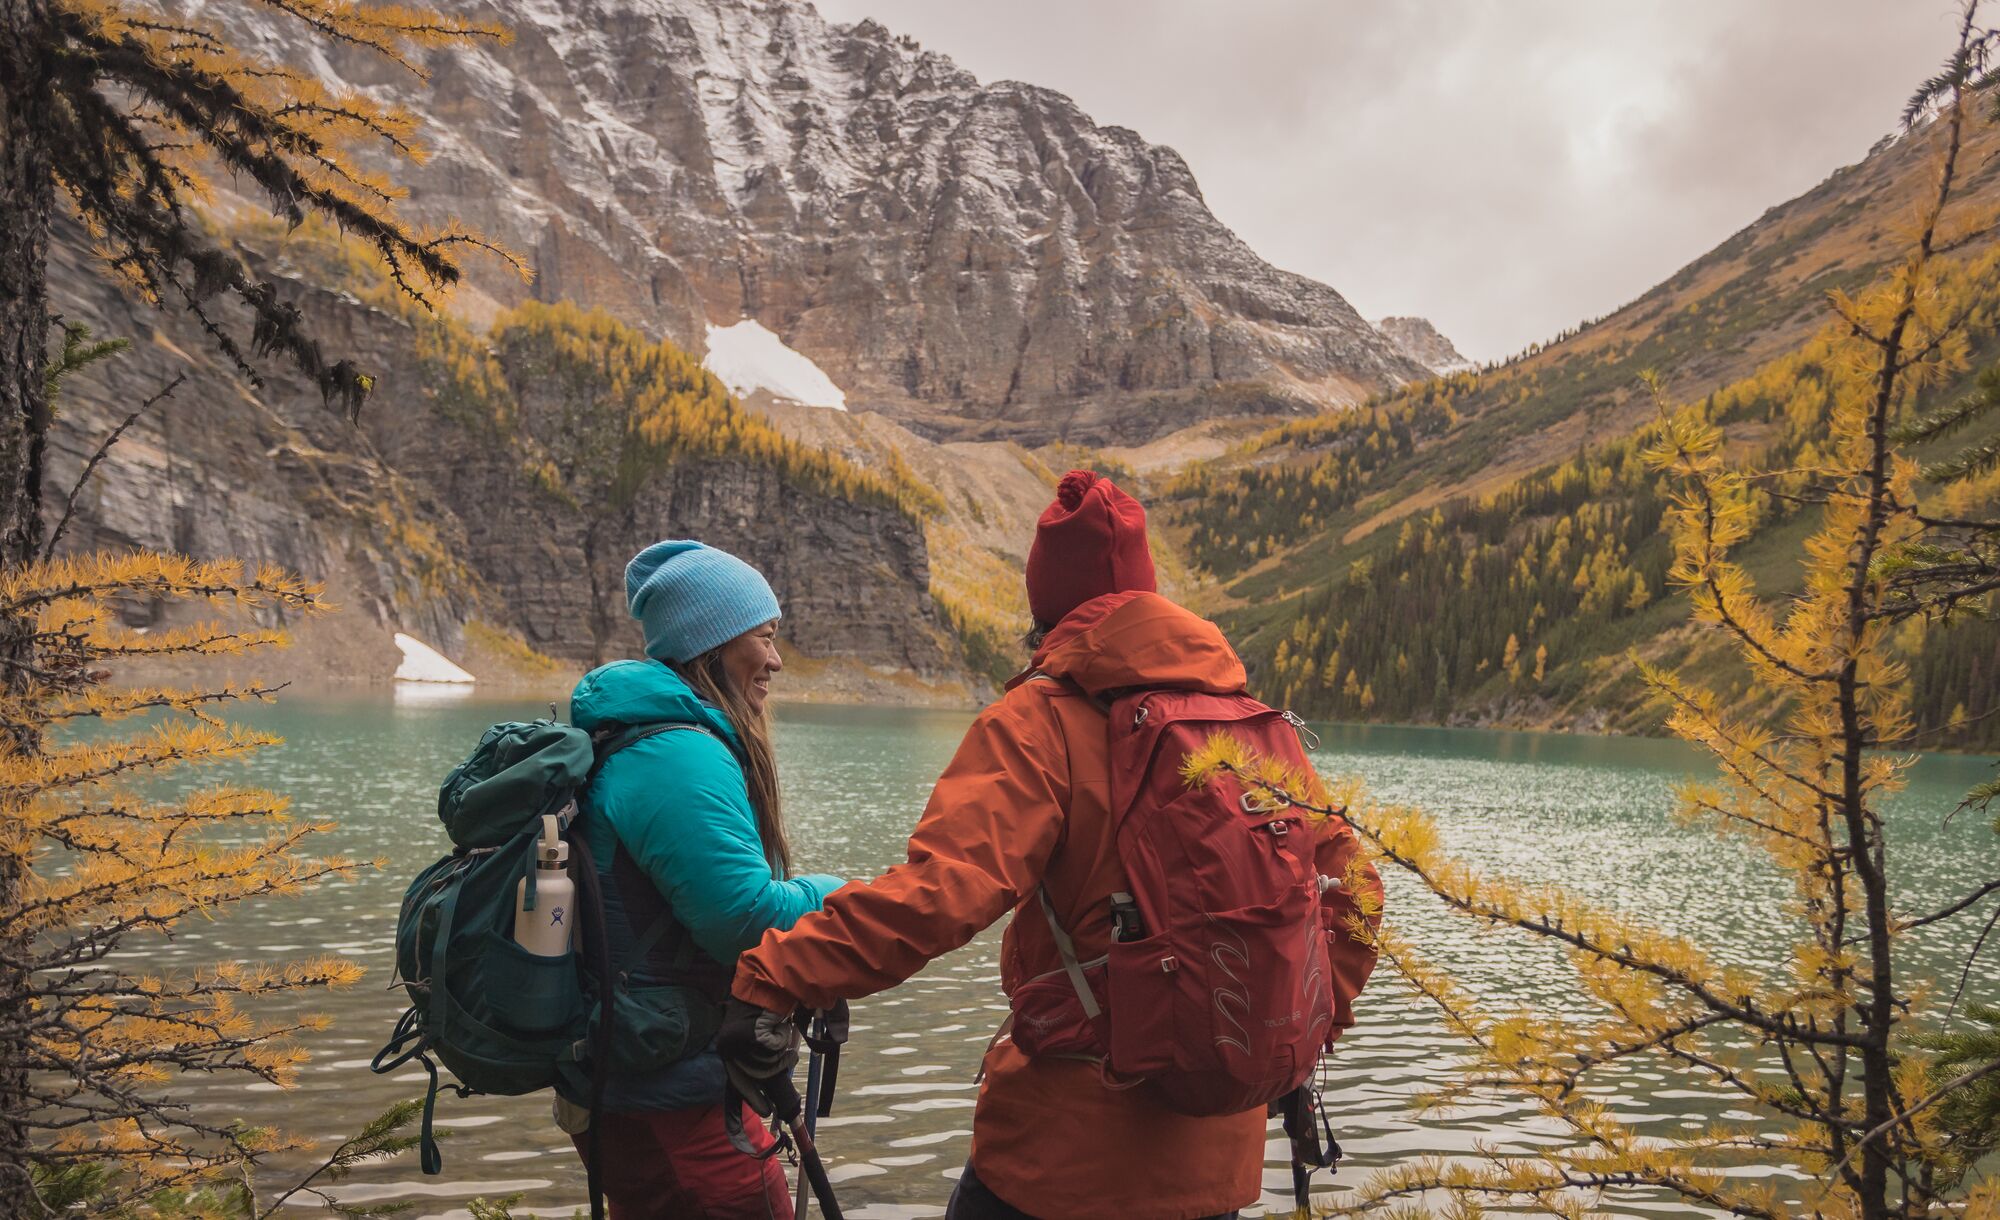 A man and woman hike alongside a lake with yellow larch trees and fresh snow on the mountains surrounding them